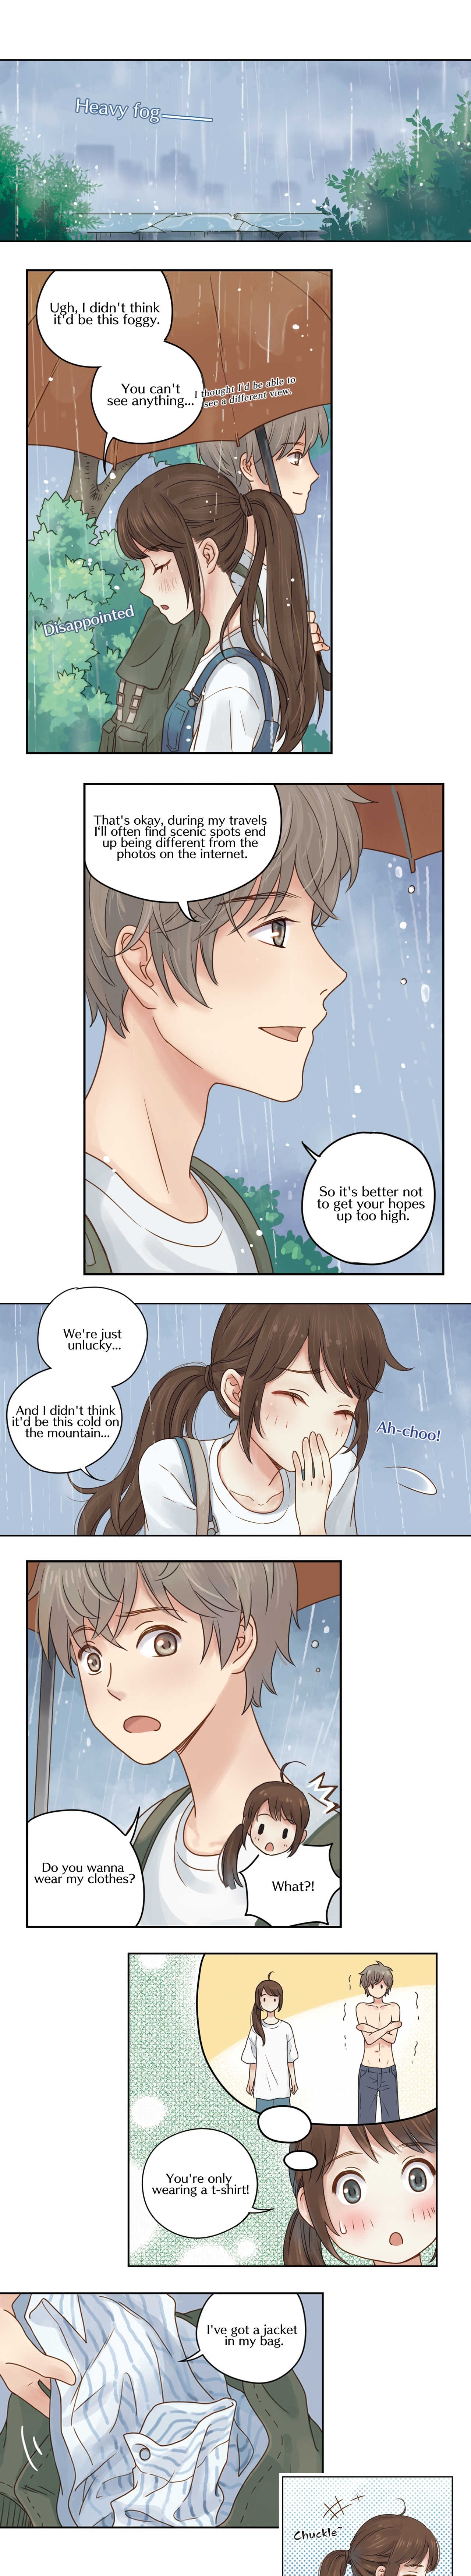 One Day(Huo Mo) ch.3